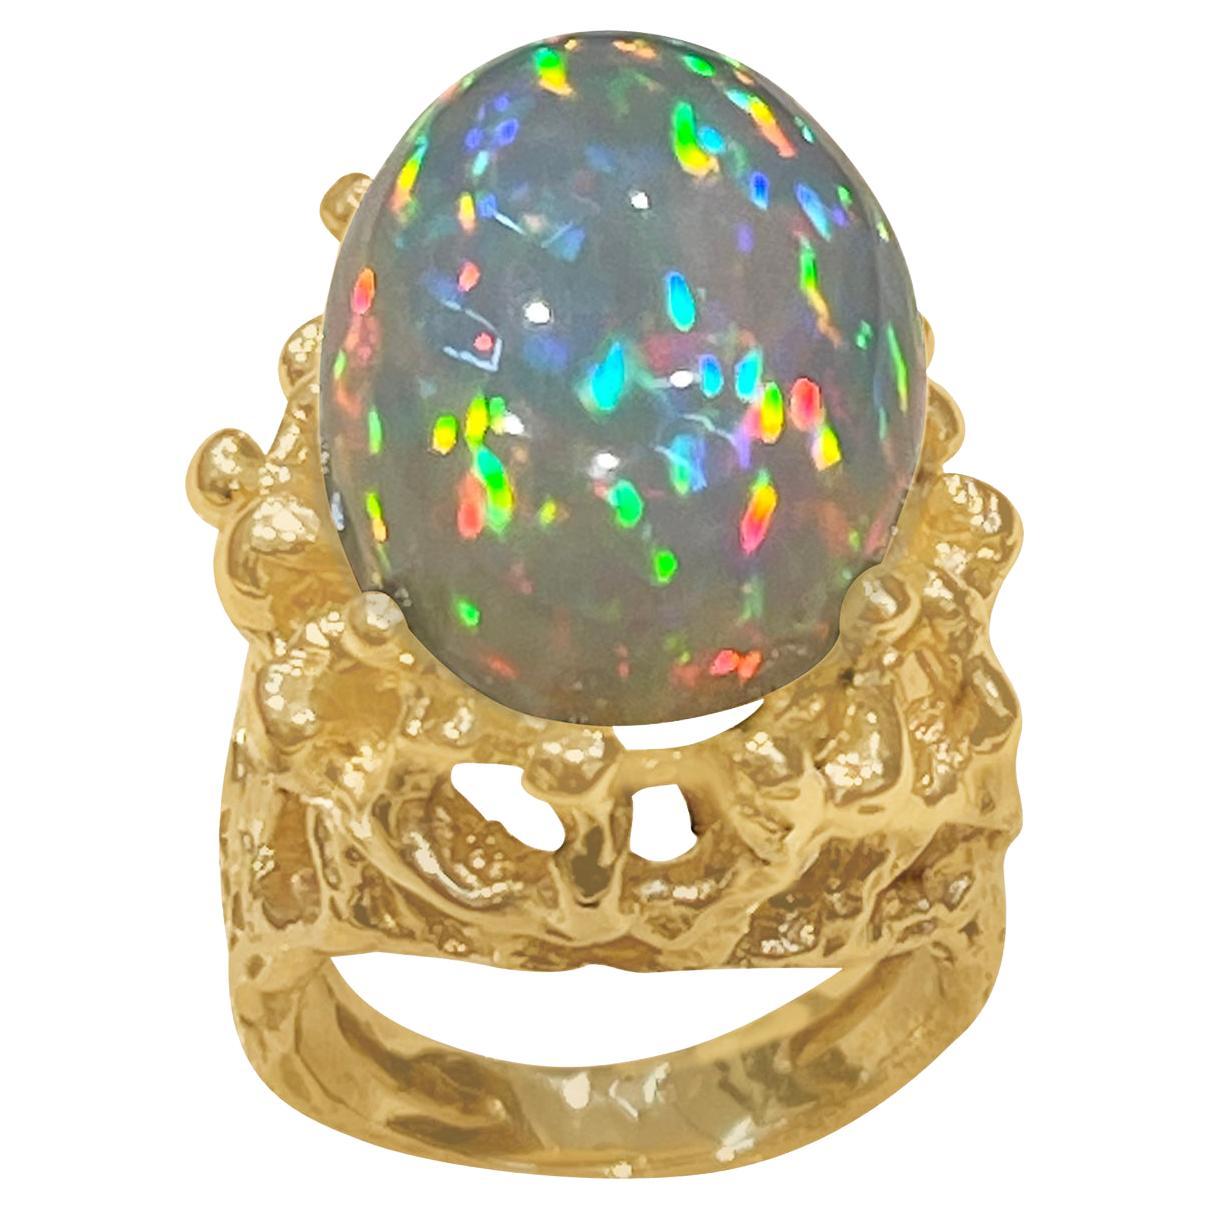 17 Carat Oval Shape Ethiopian Opal Cocktail Ring 14 Karat Yellow Gold Solid Ring